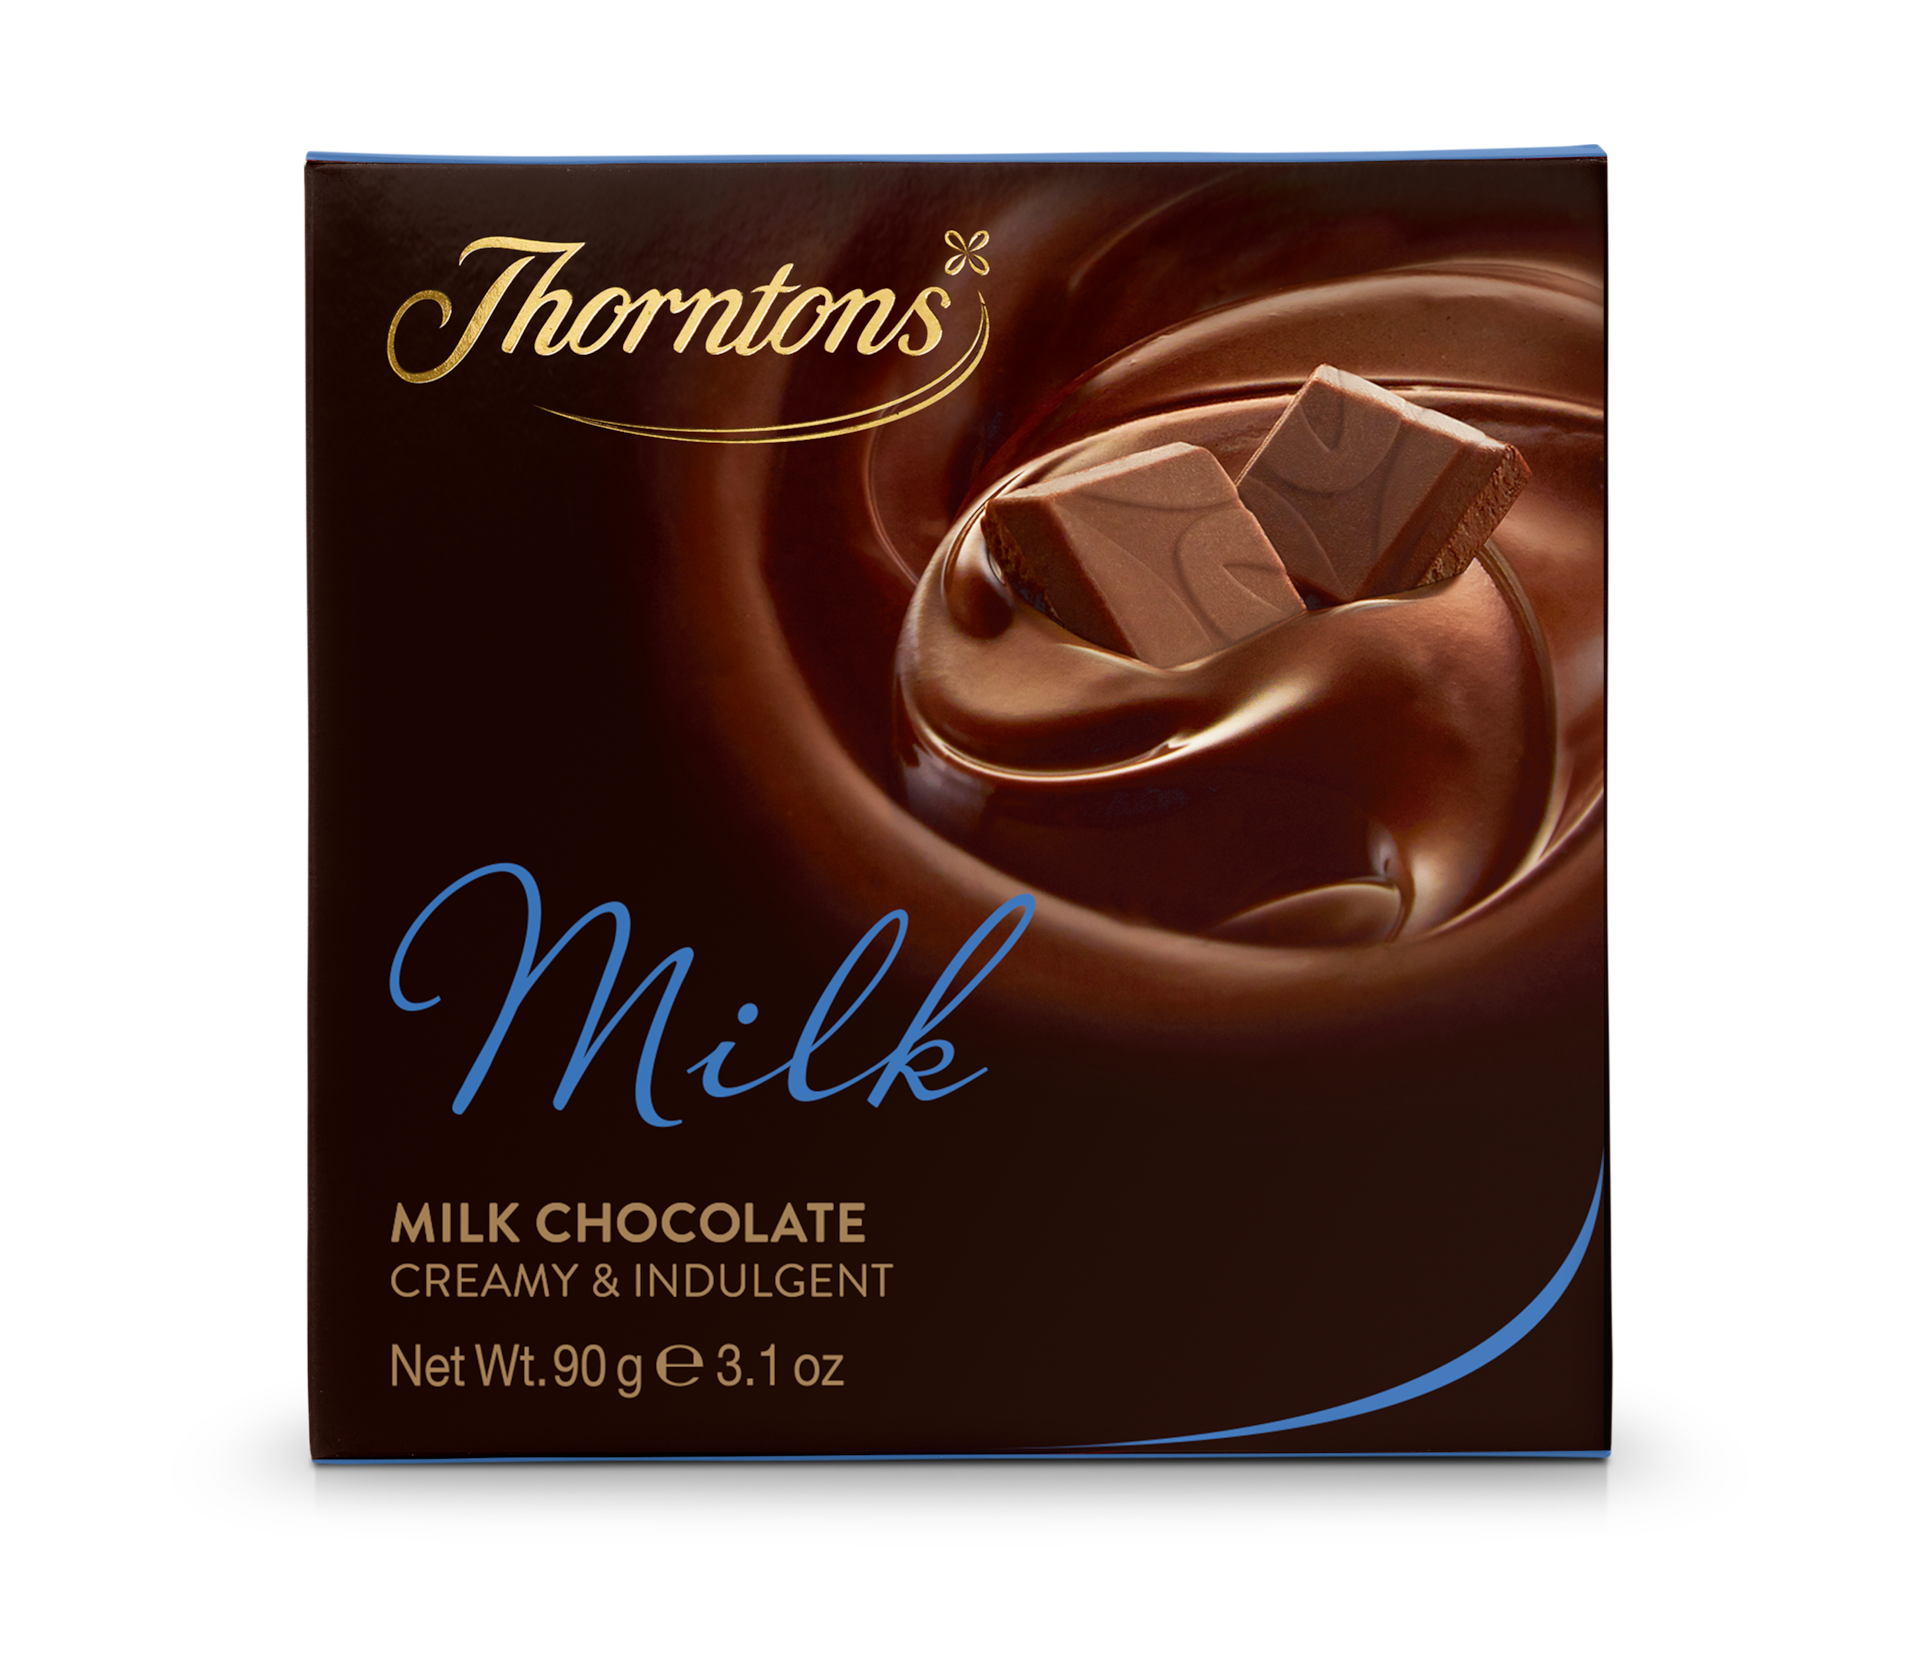 https://www.thorntons.com/medias/sys_master/images/h15/he2/8916763115550/77176916_main/77176916-main.png?resize=xs-s-xs